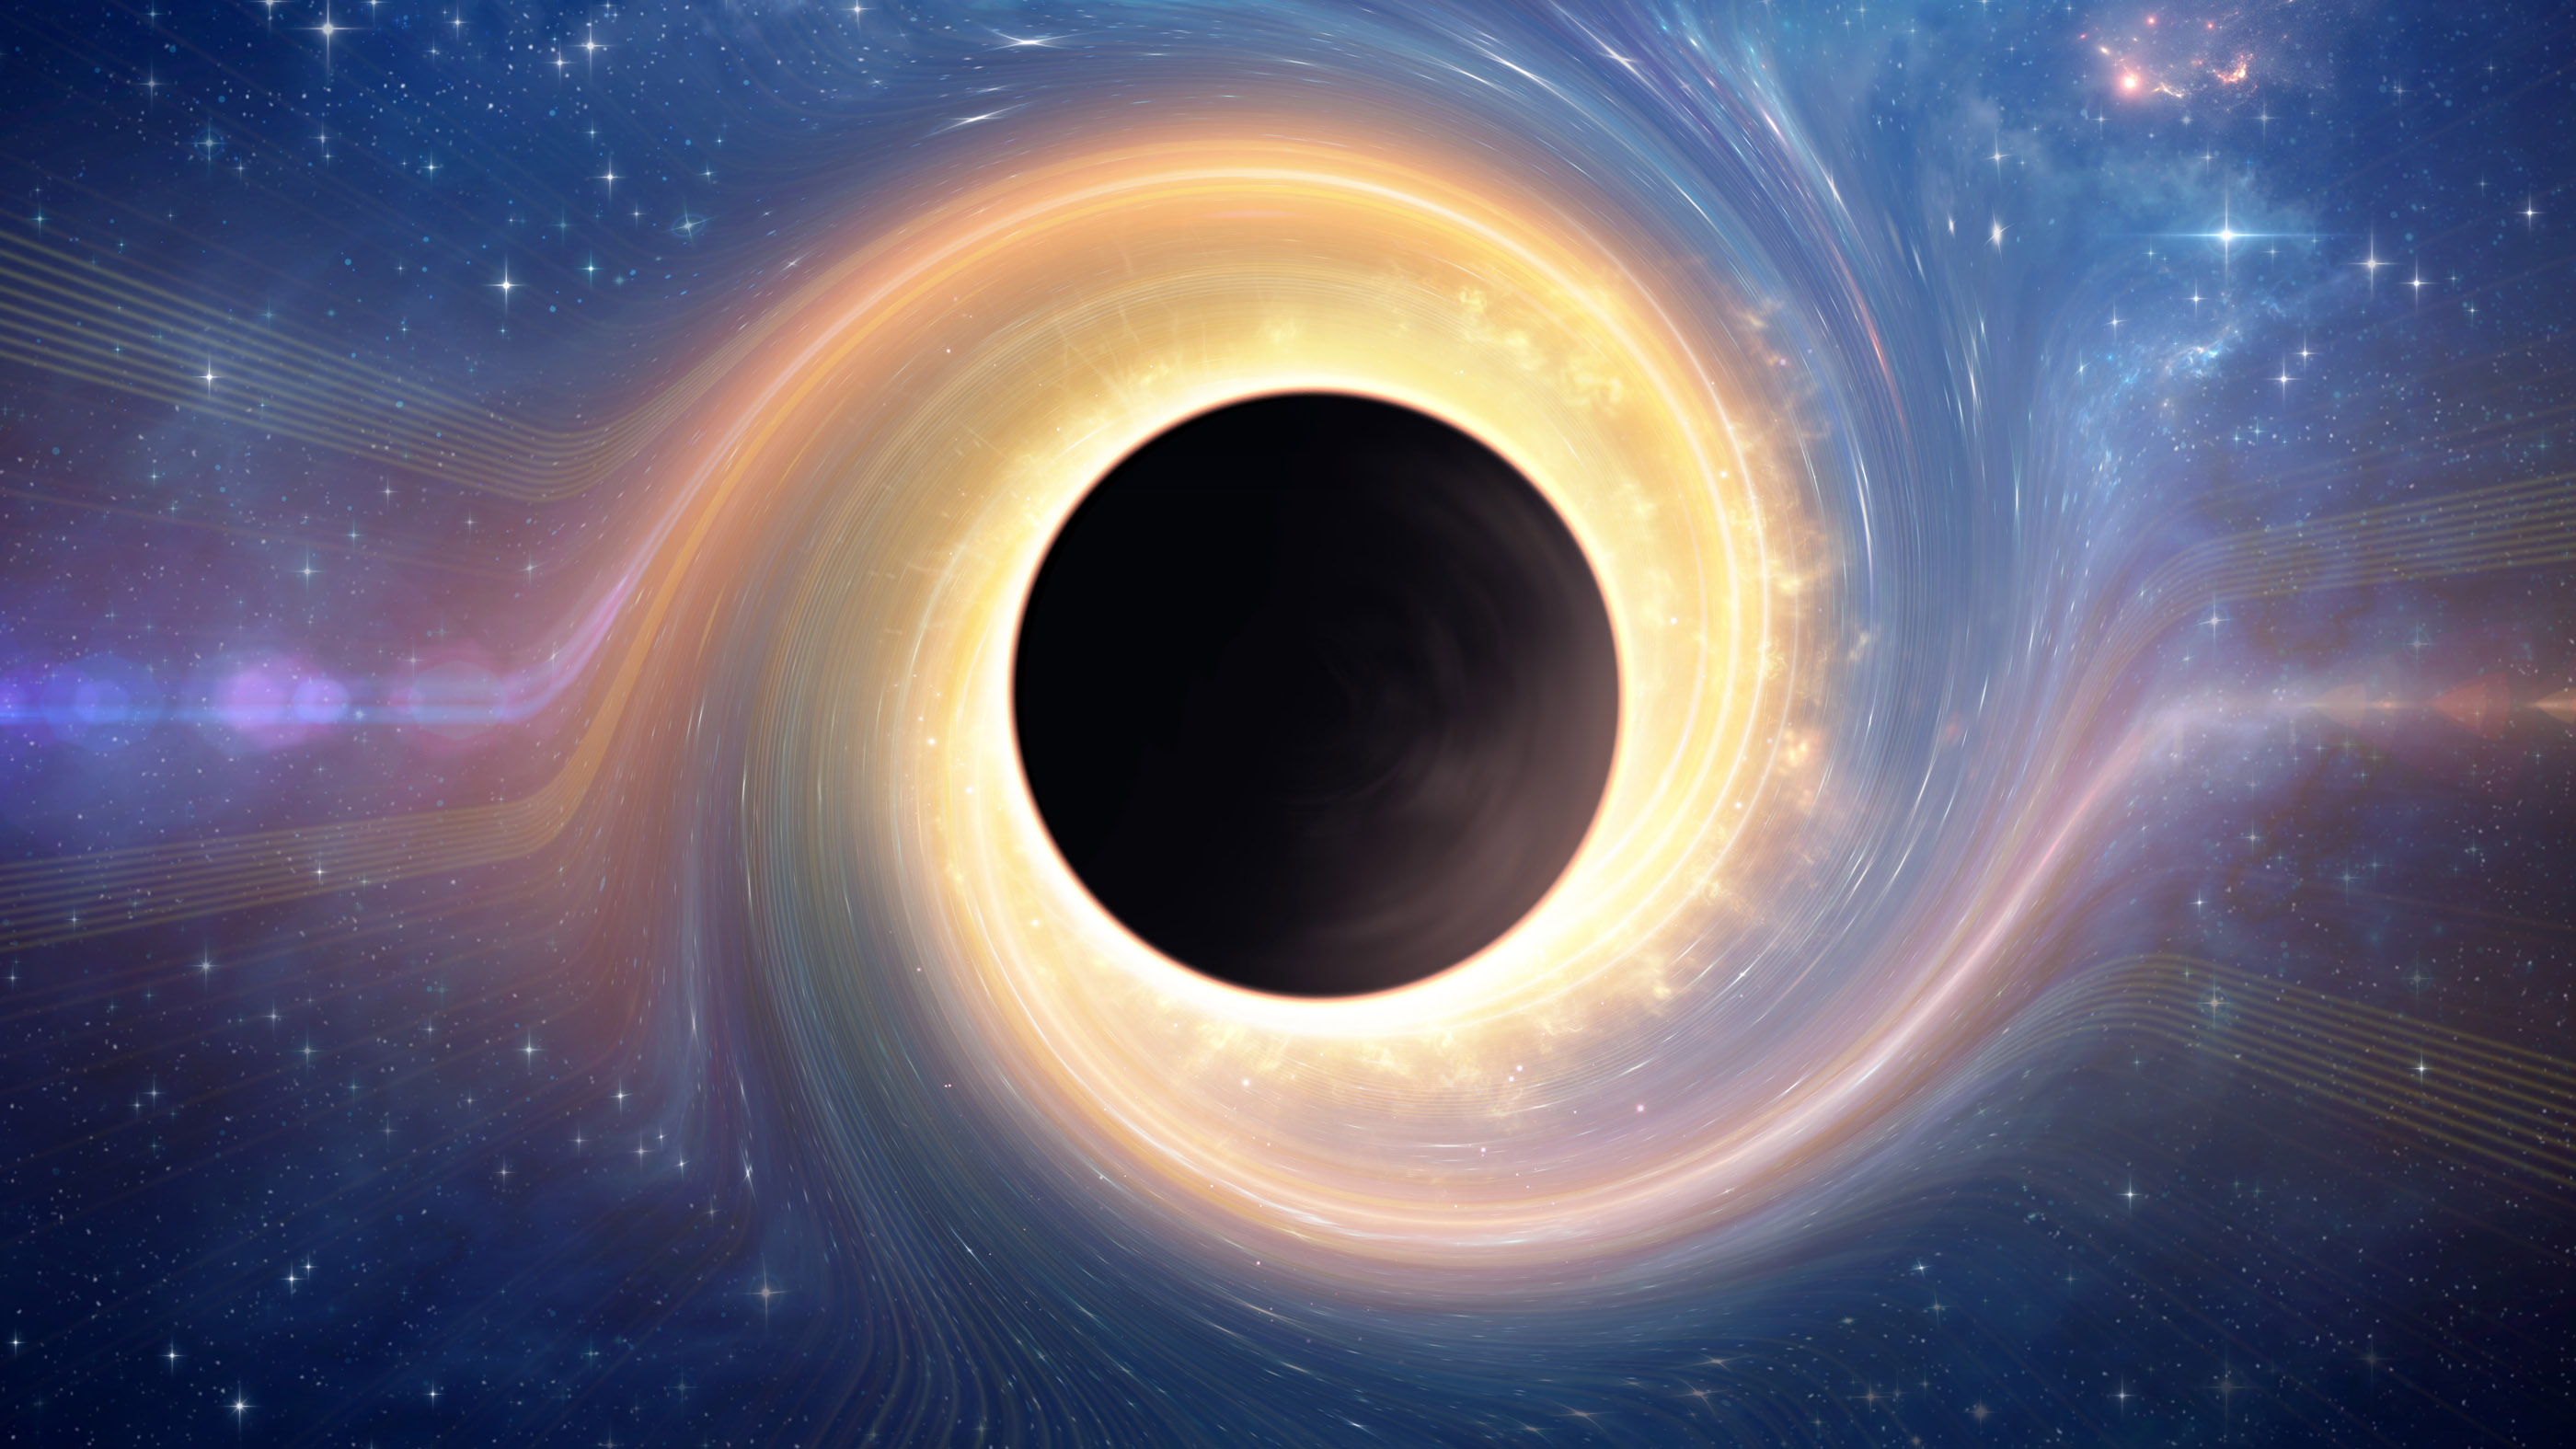 Black holes shouldn't echo, but this one might. Score 1 for Stephen Hawking? | Live Science